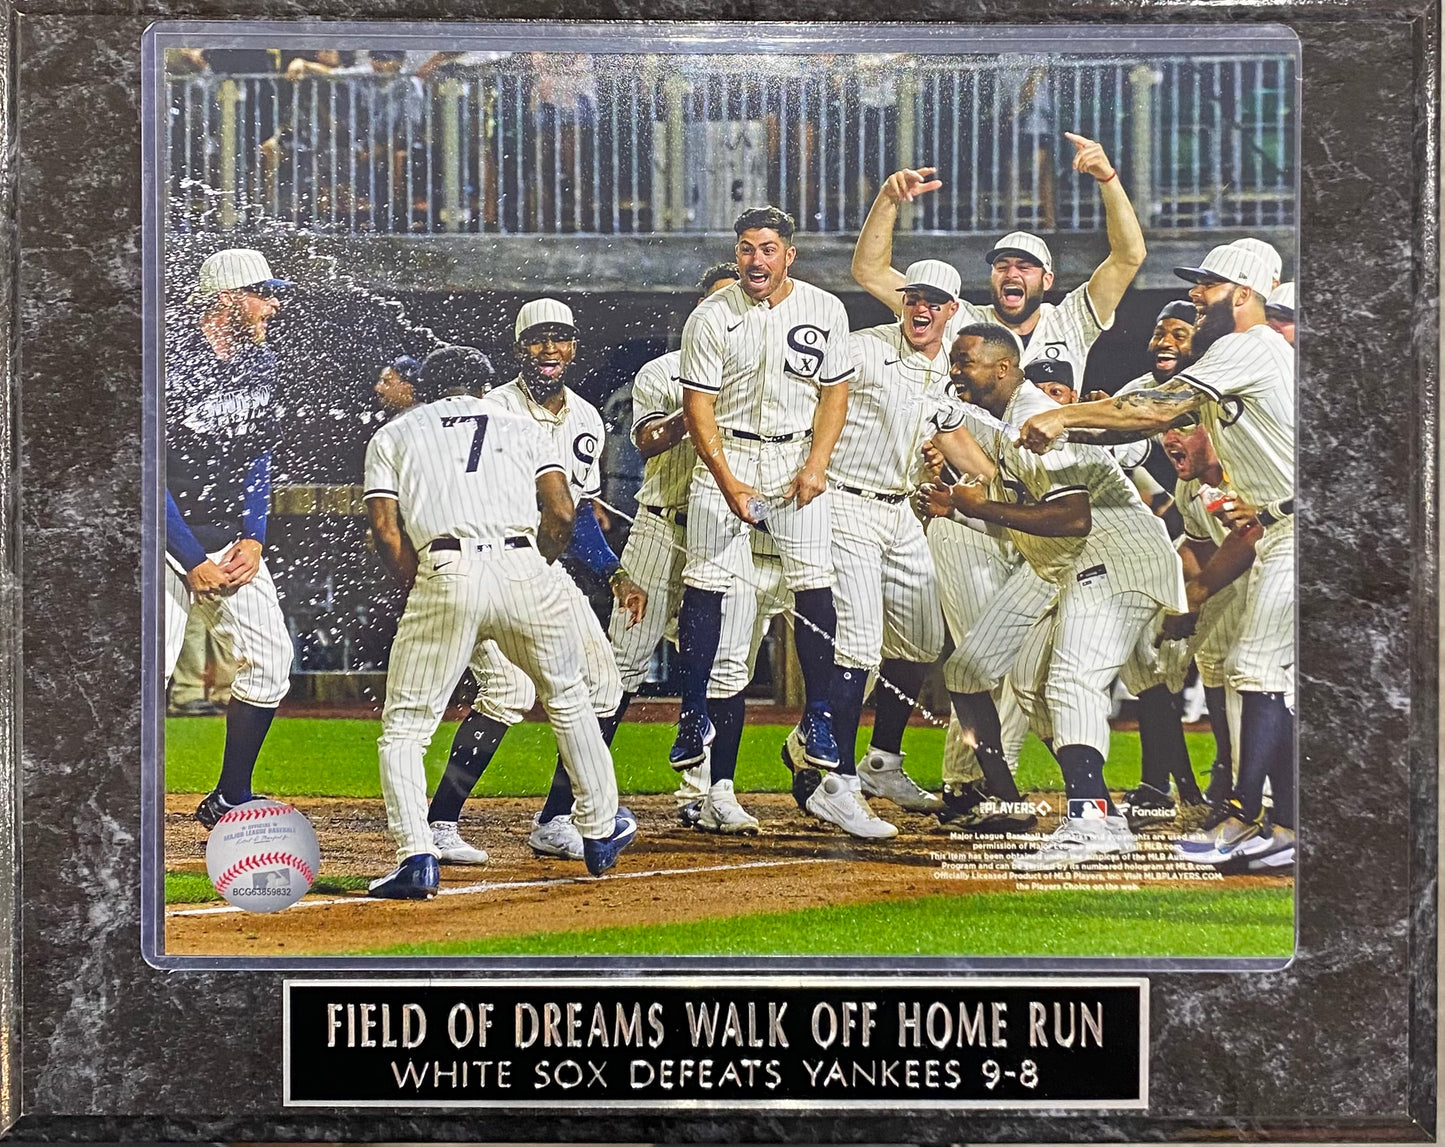 Field Of Dreams Game Walk Off Home Run White Sox Defeat Yankees 9-8 Wall Plaque